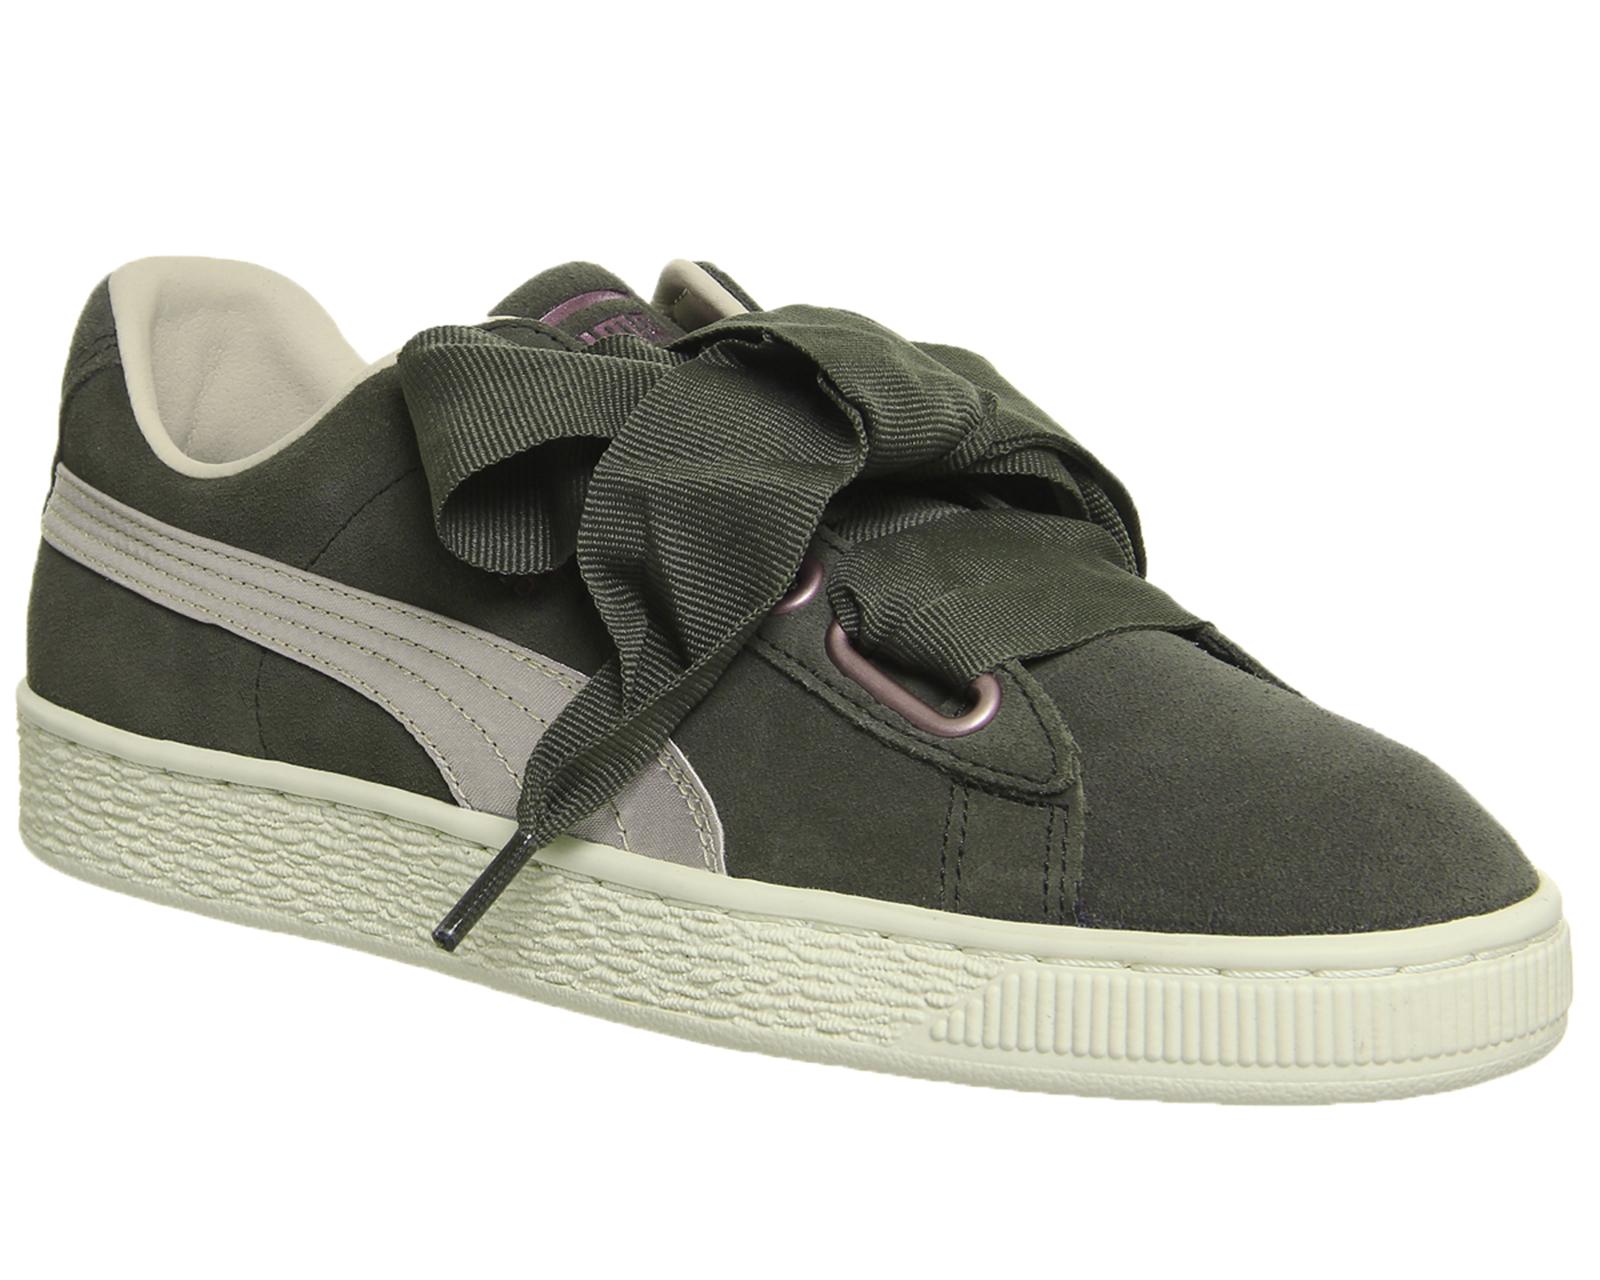 PUMA Suede Heart Olive Night Pink Tint Rose Gold - 5 Uk in Green - Lyst